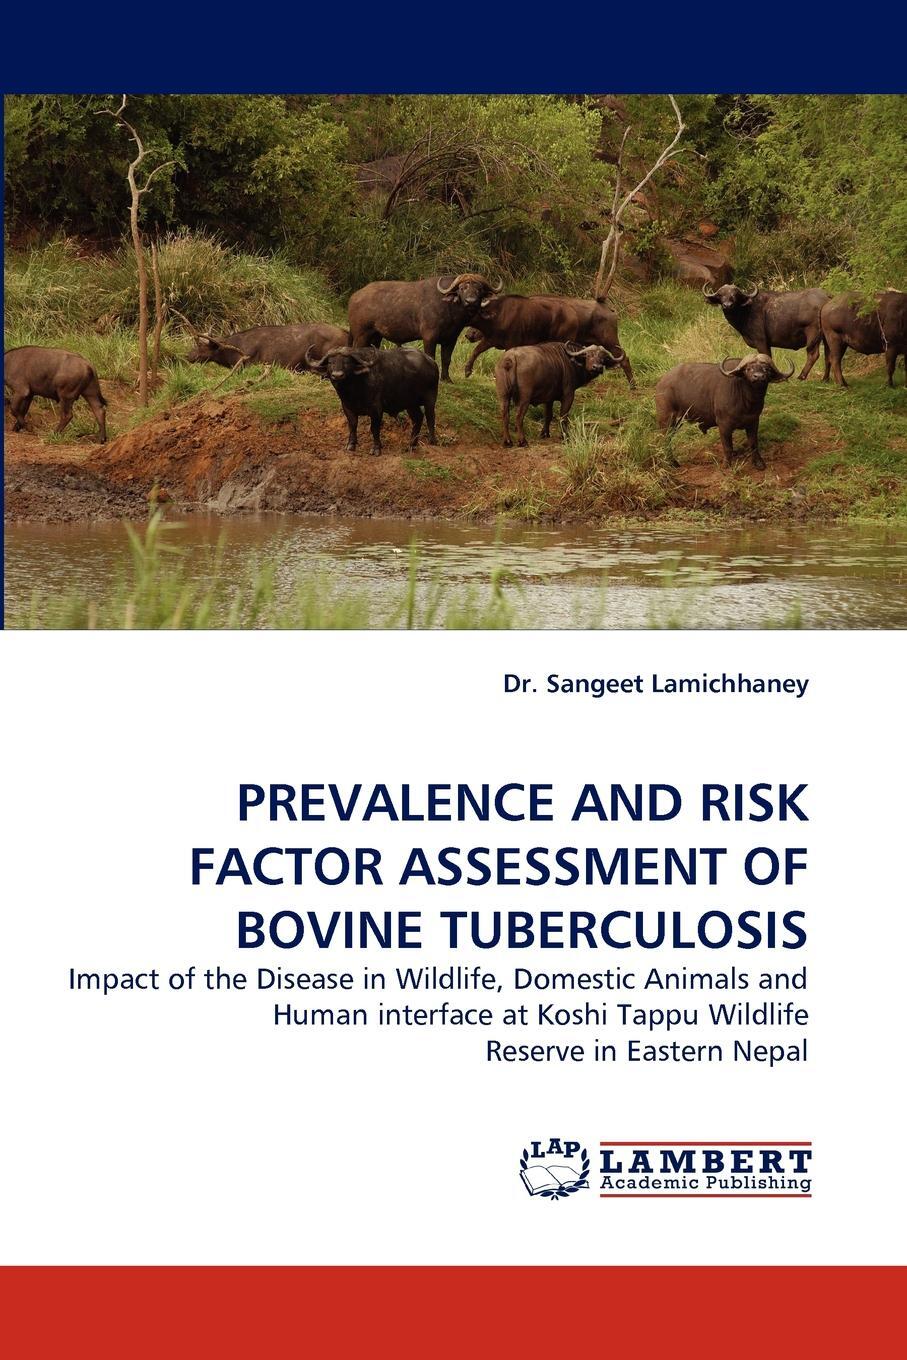 фото Prevalence and Risk Factor Assessment of Bovine Tuberculosis